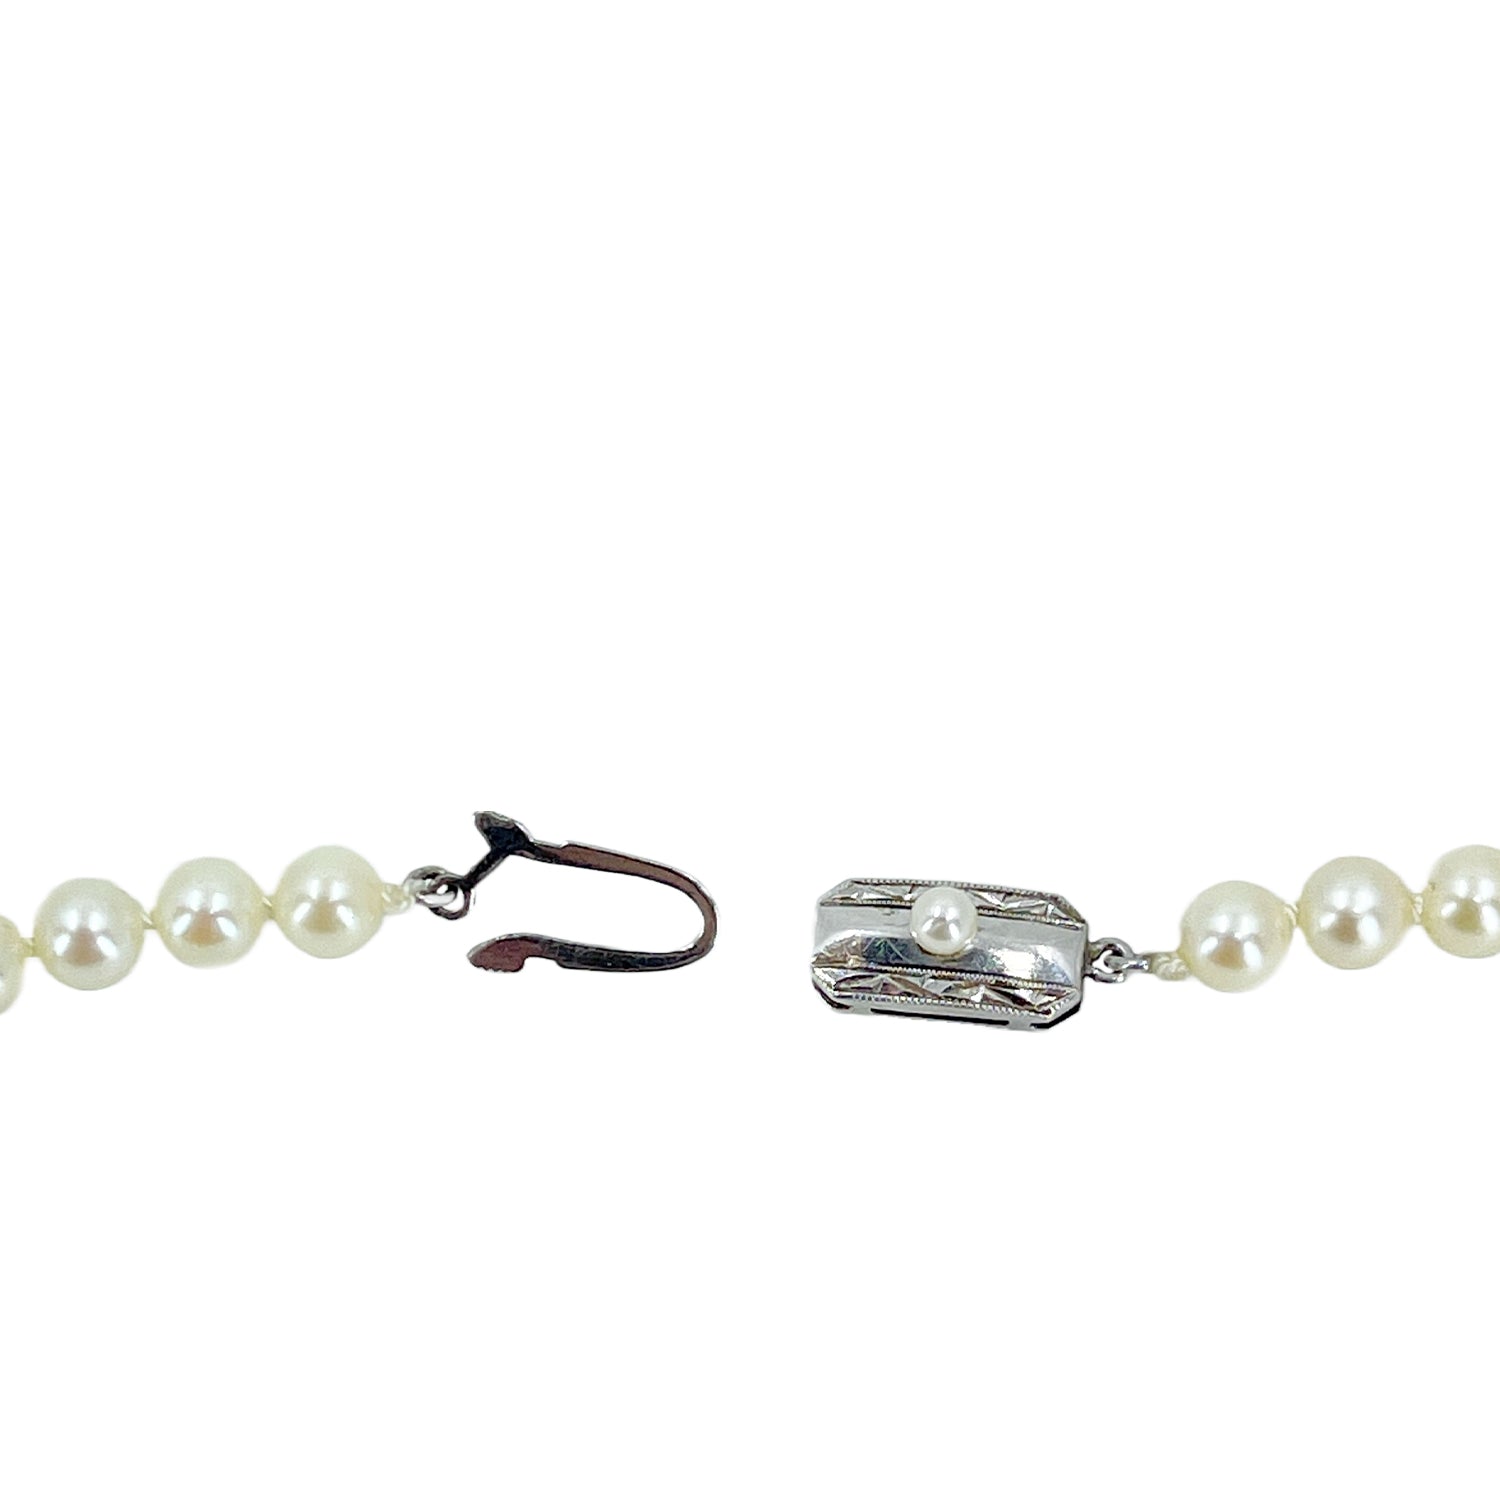 Petite Deco Japanese Saltwater Cultured Akoya Pearl Vintage Choker Necklace - Sterling Silver 16.25 Inch